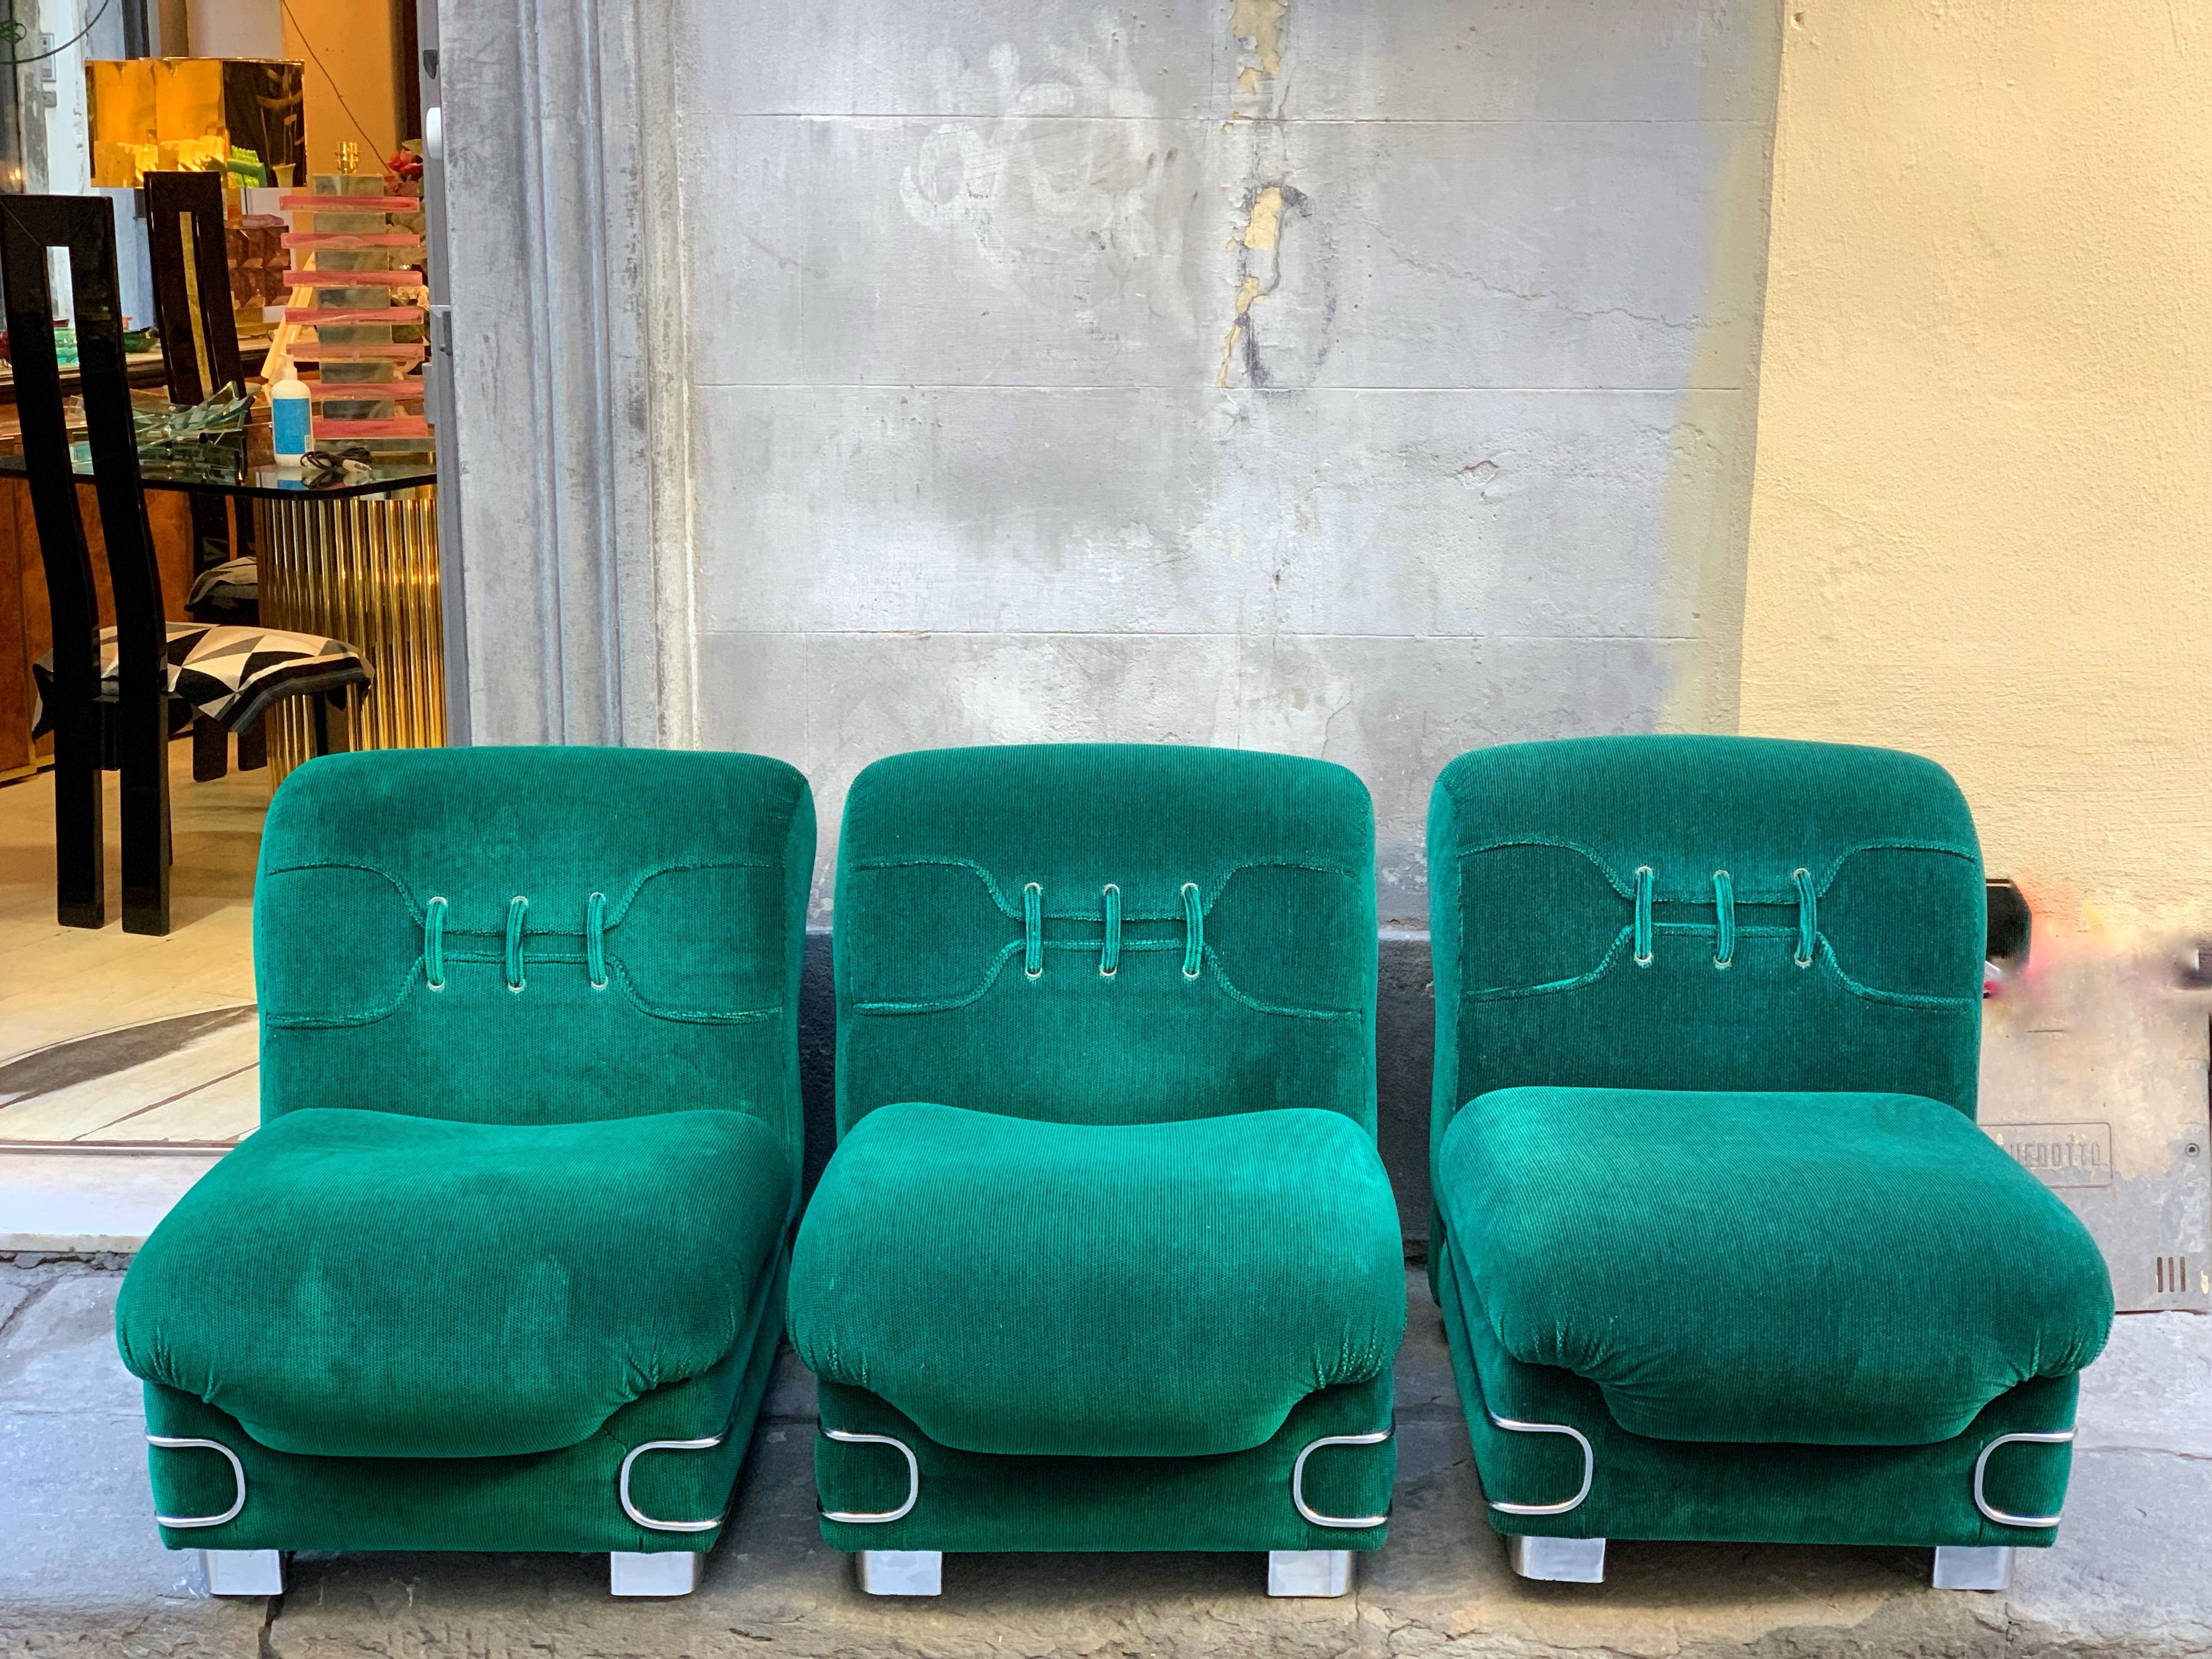 Italian Set of Three Vintage Green Armchairs with Chrome Details, 1970s